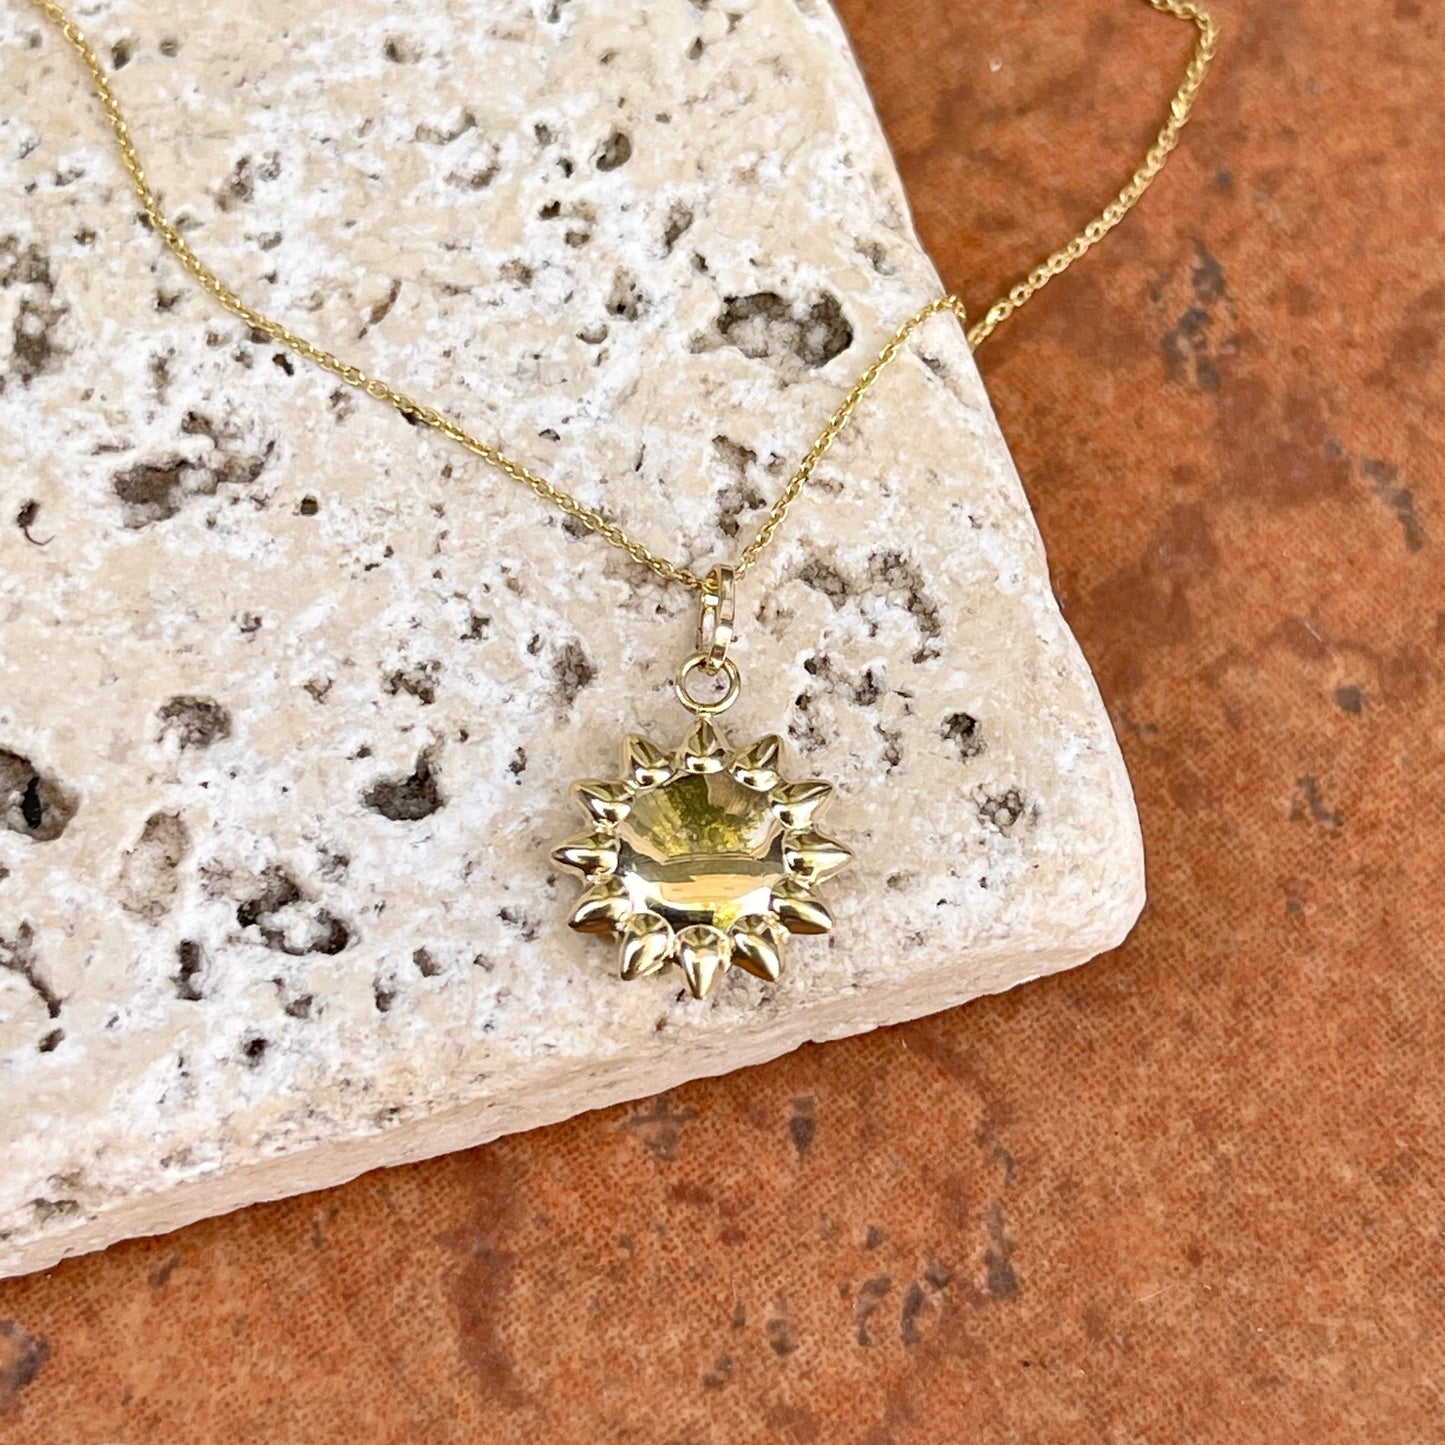 14KT Yellow Gold Puffed Sun Pendant Chain Necklace